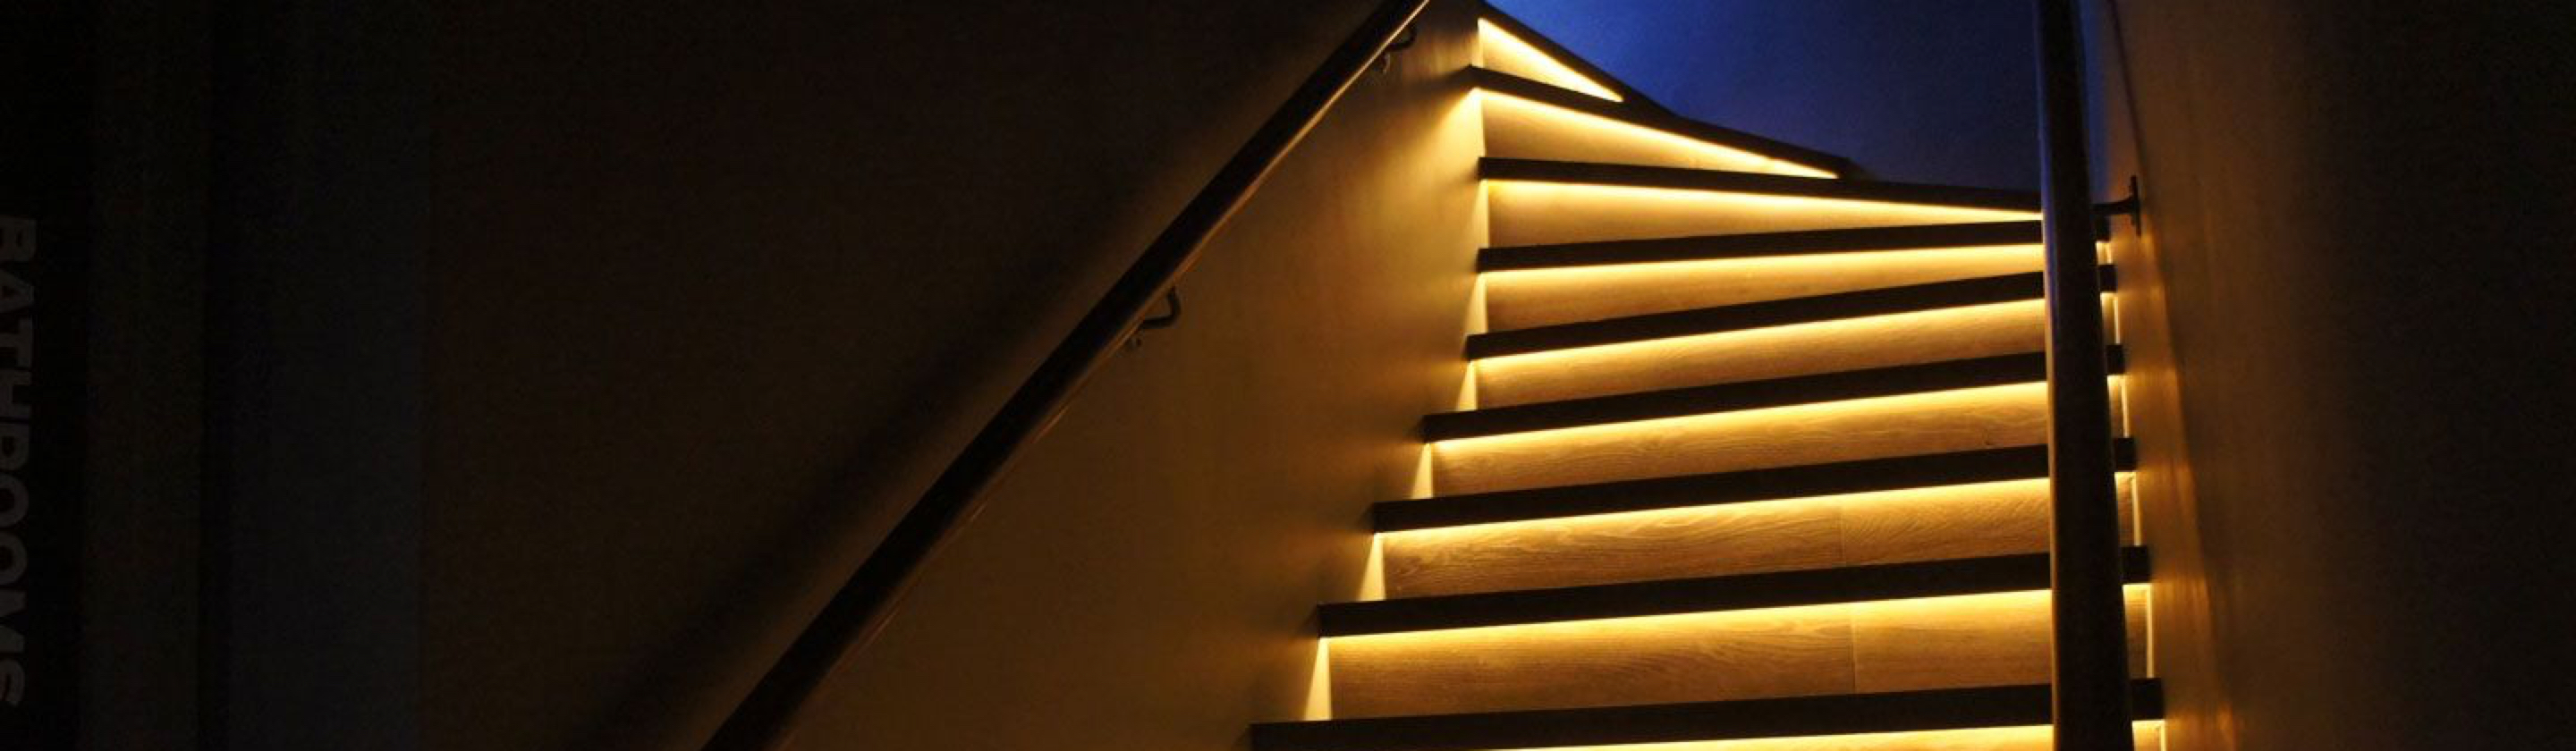 Staircase warm LED lighting strips.